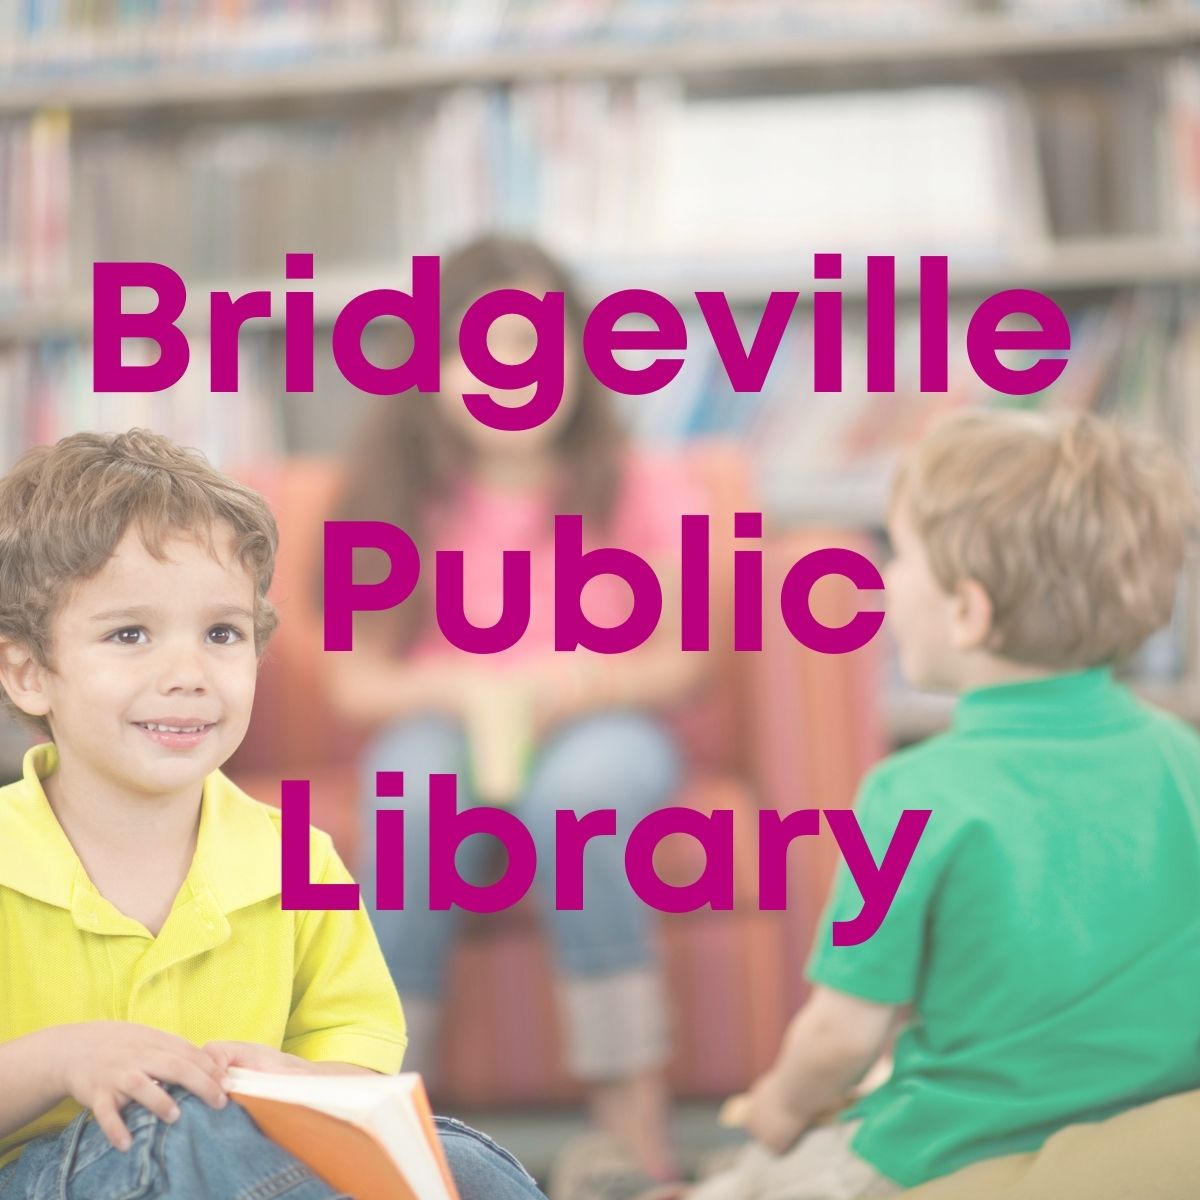 Business Directory Listings for Bridgeville Public Library